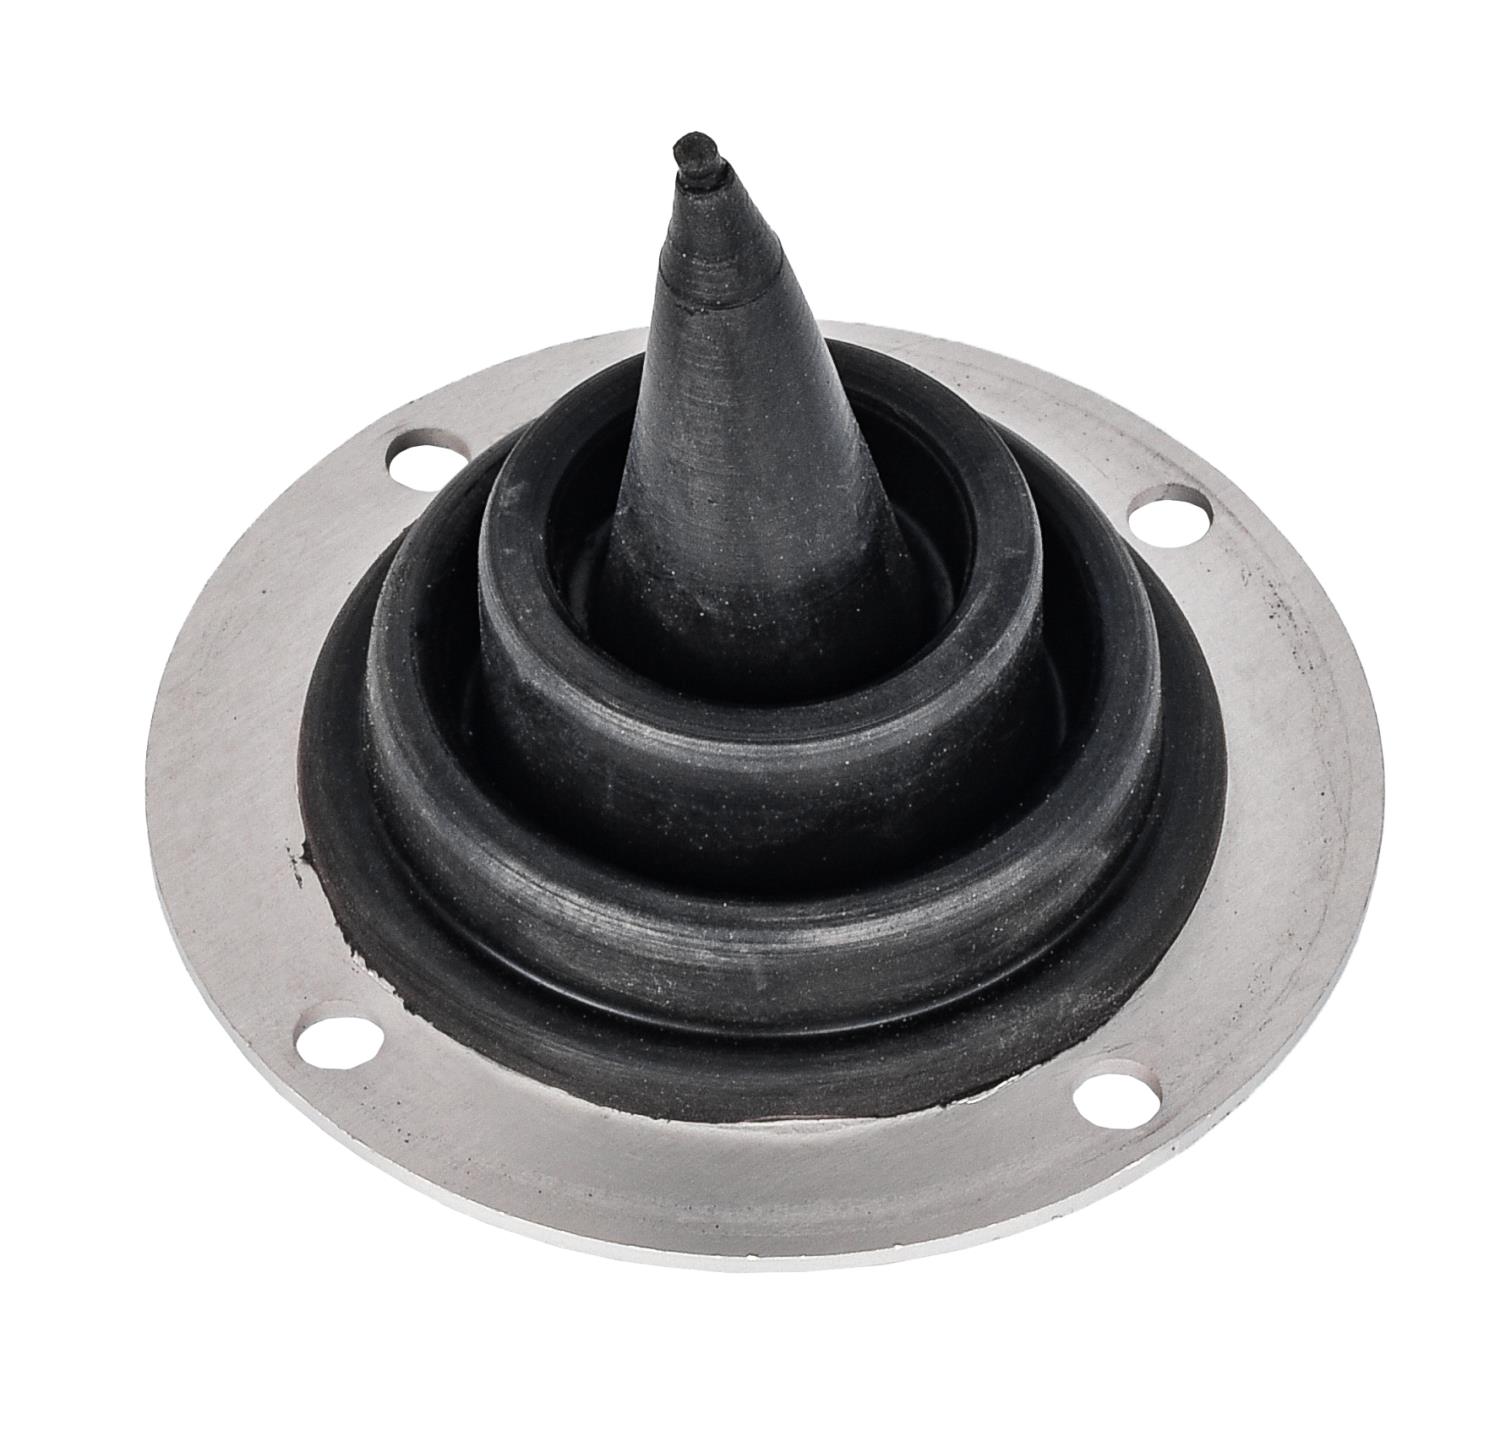 Firewall Grommet Seal, 1-Piece Pointed Style [No Hole]